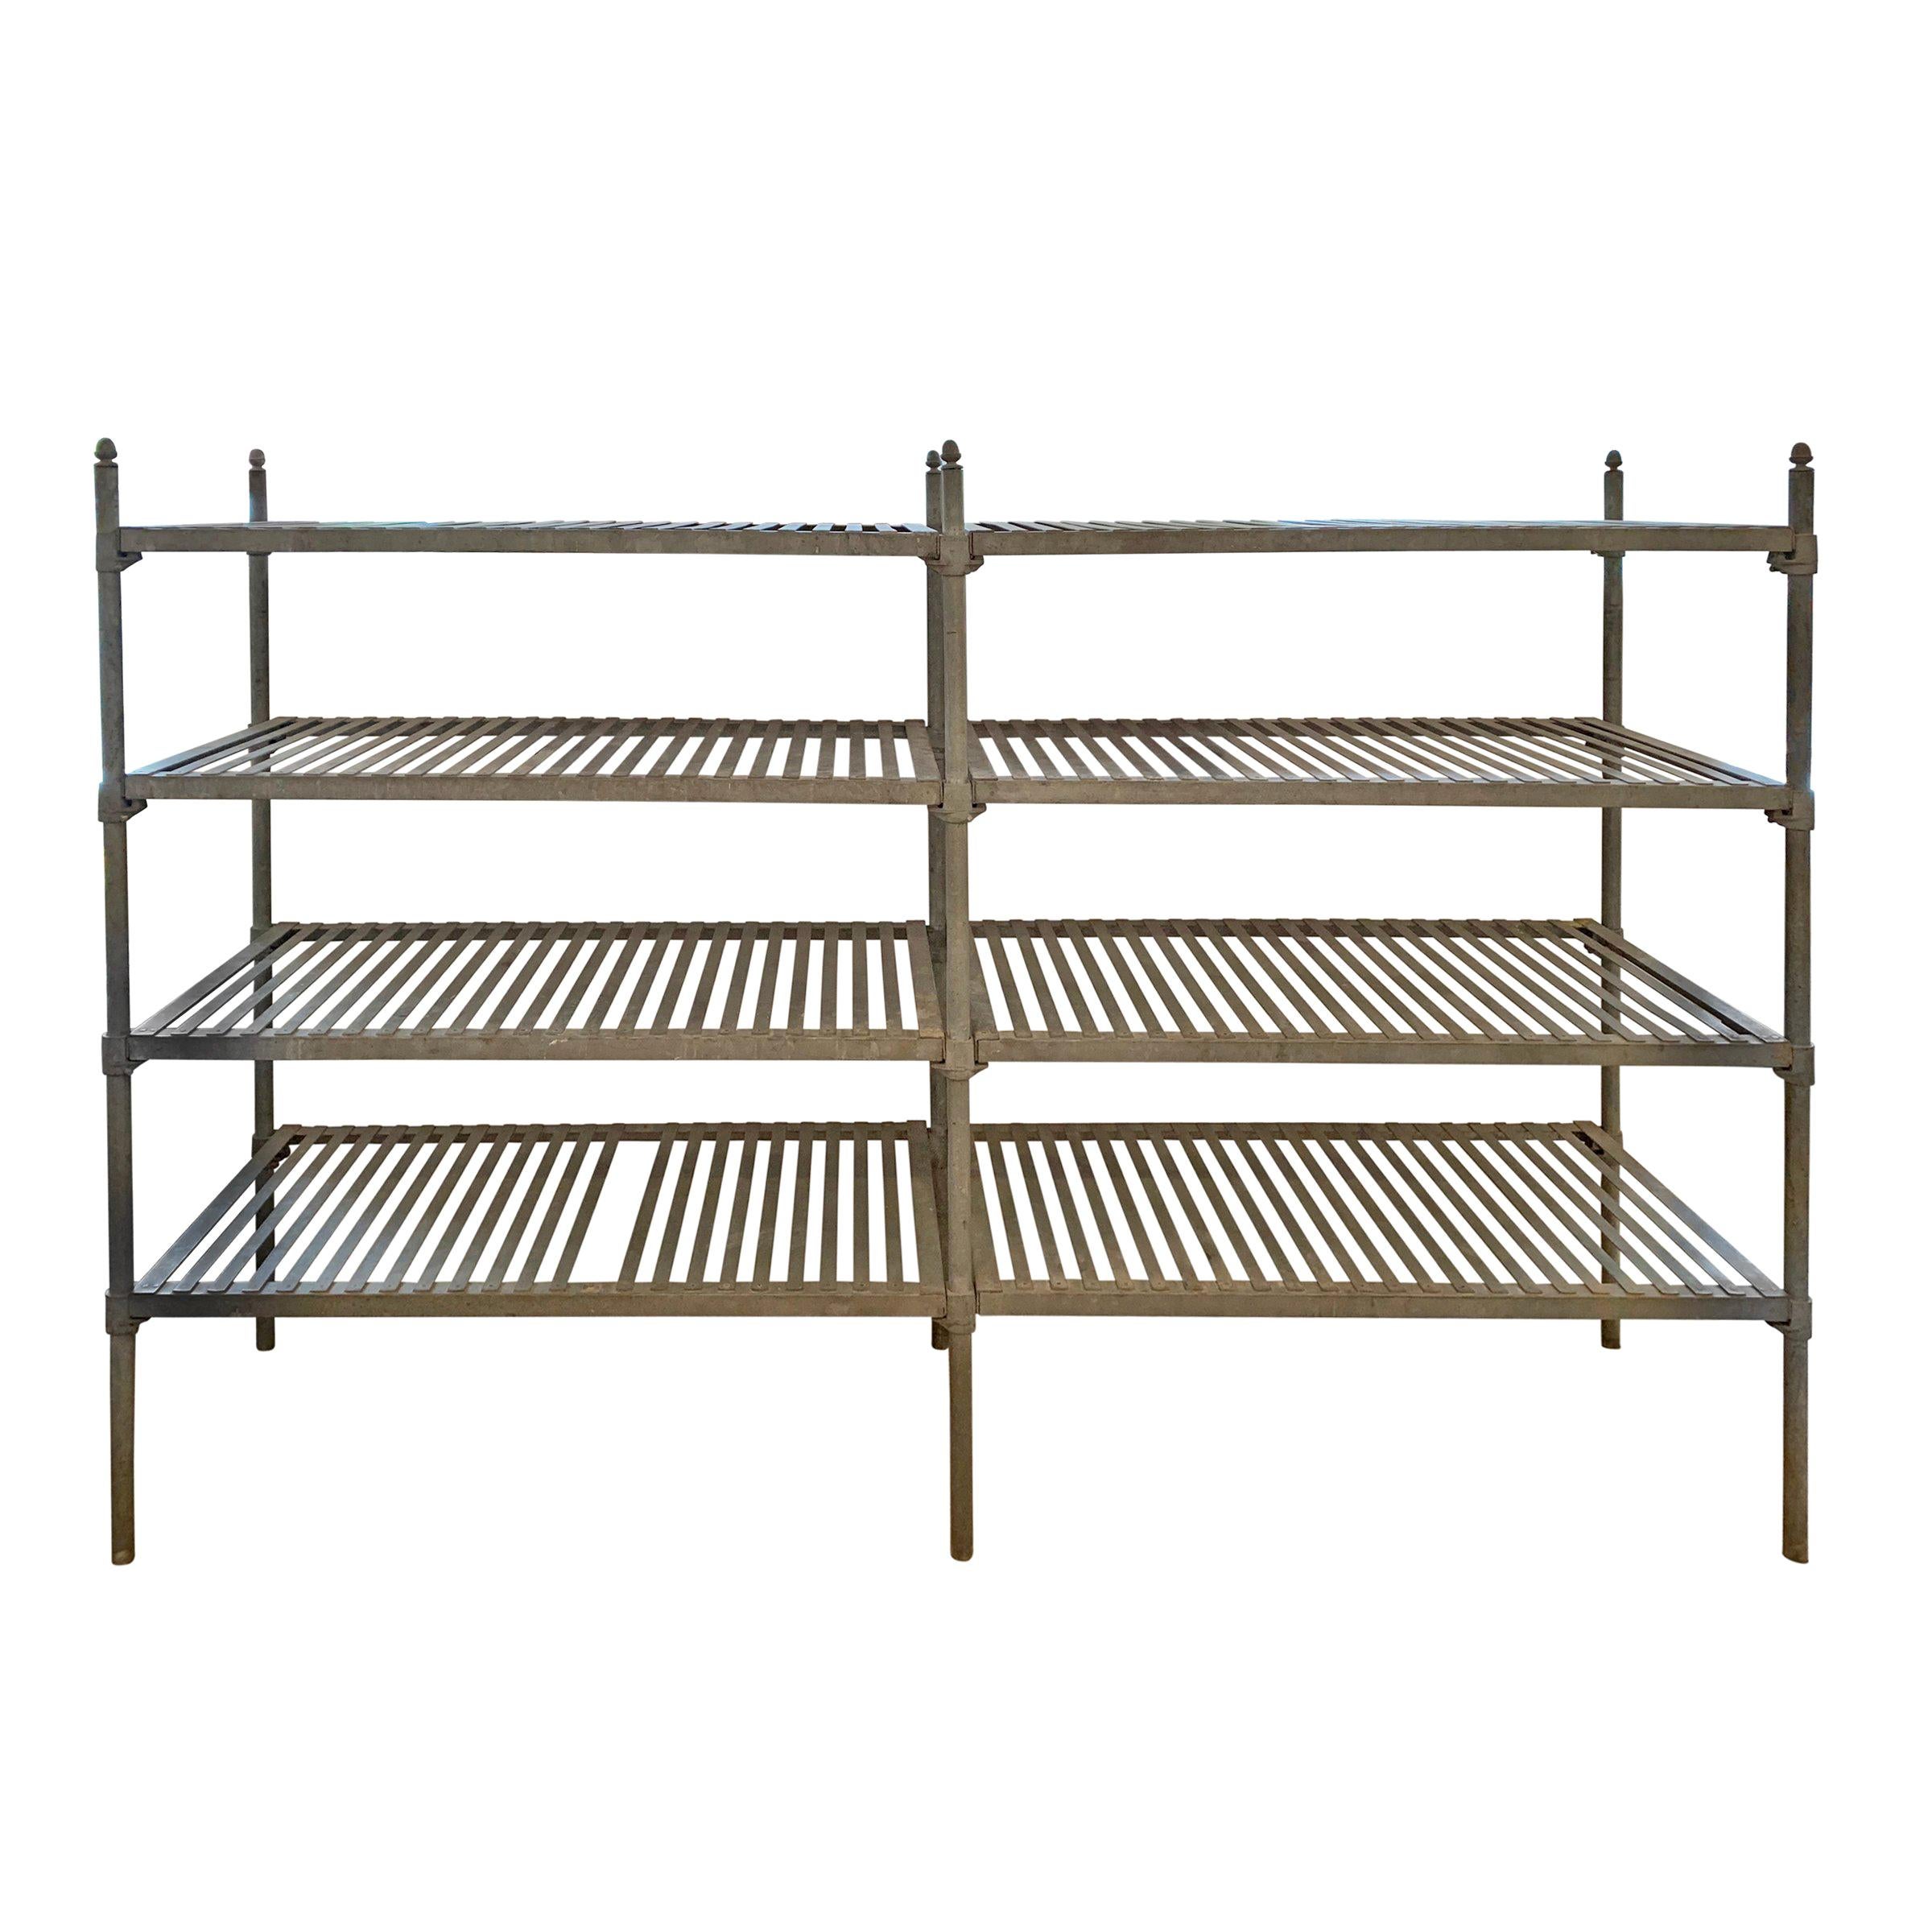 Early 20th Century French Industrial Galvanized Zinc Shelving